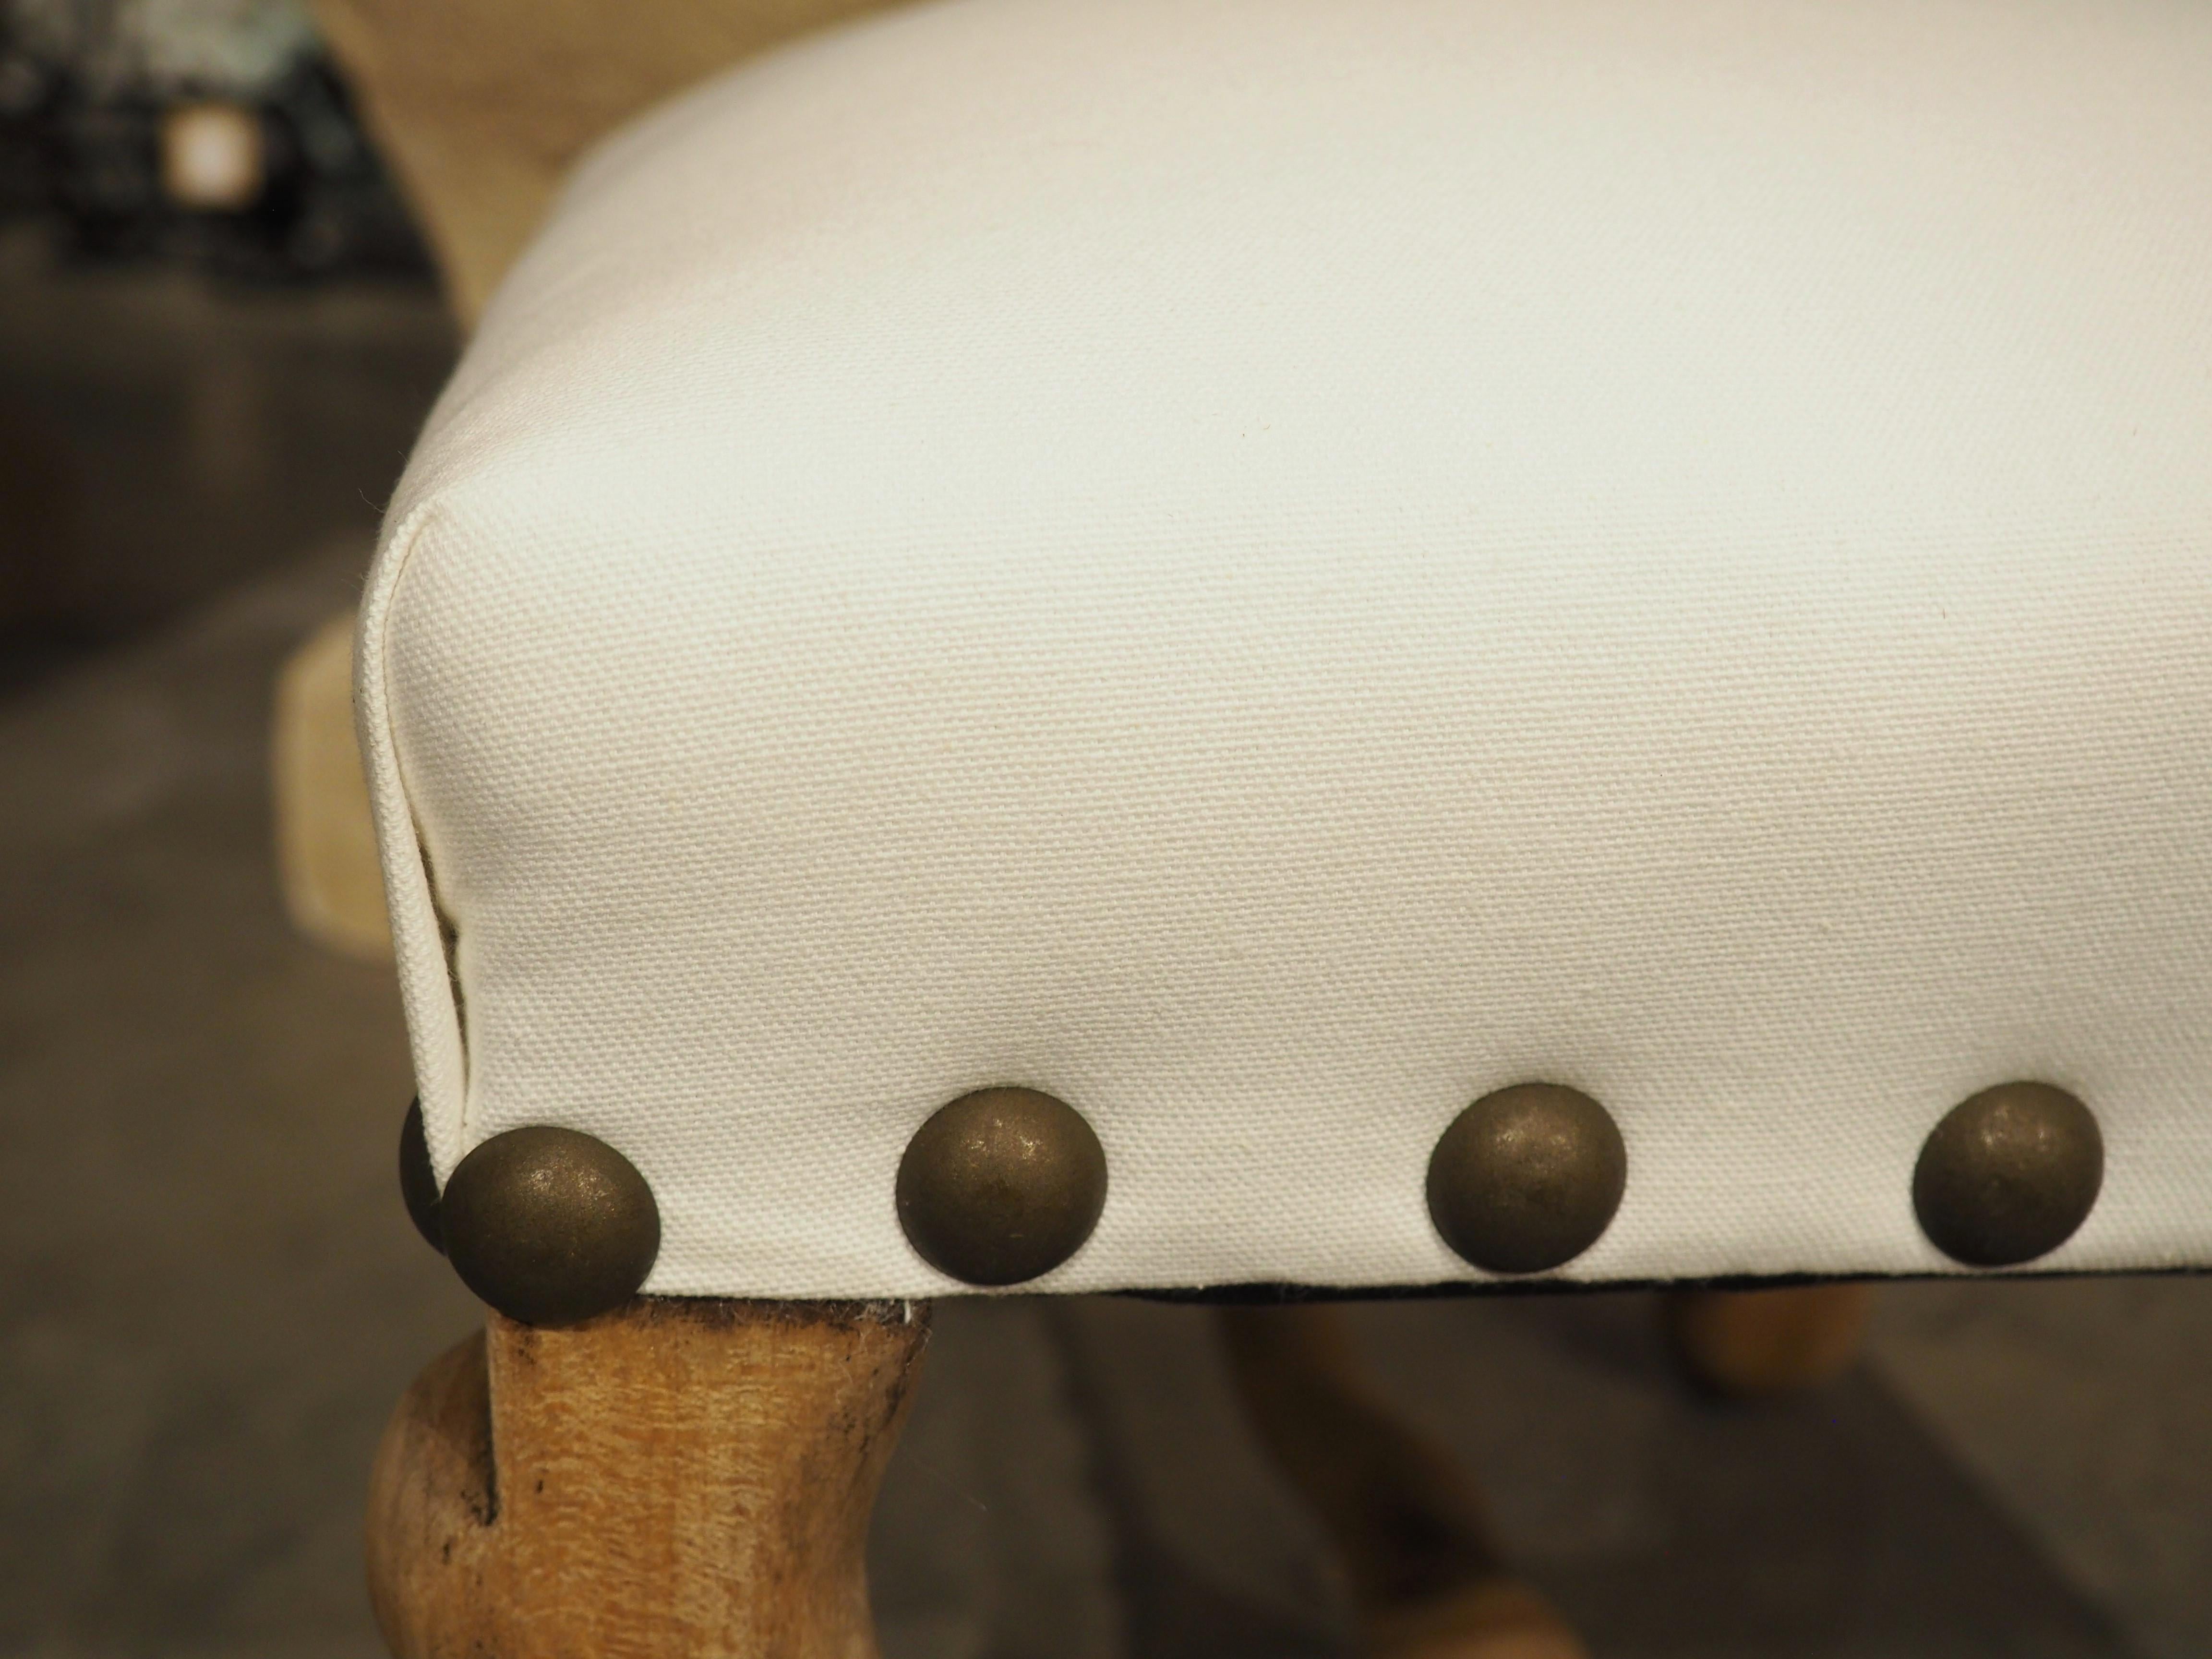 Metal Bleached French Os De Mouton Tabouret Stool, White Cotton Upholstery, C. 1900 For Sale